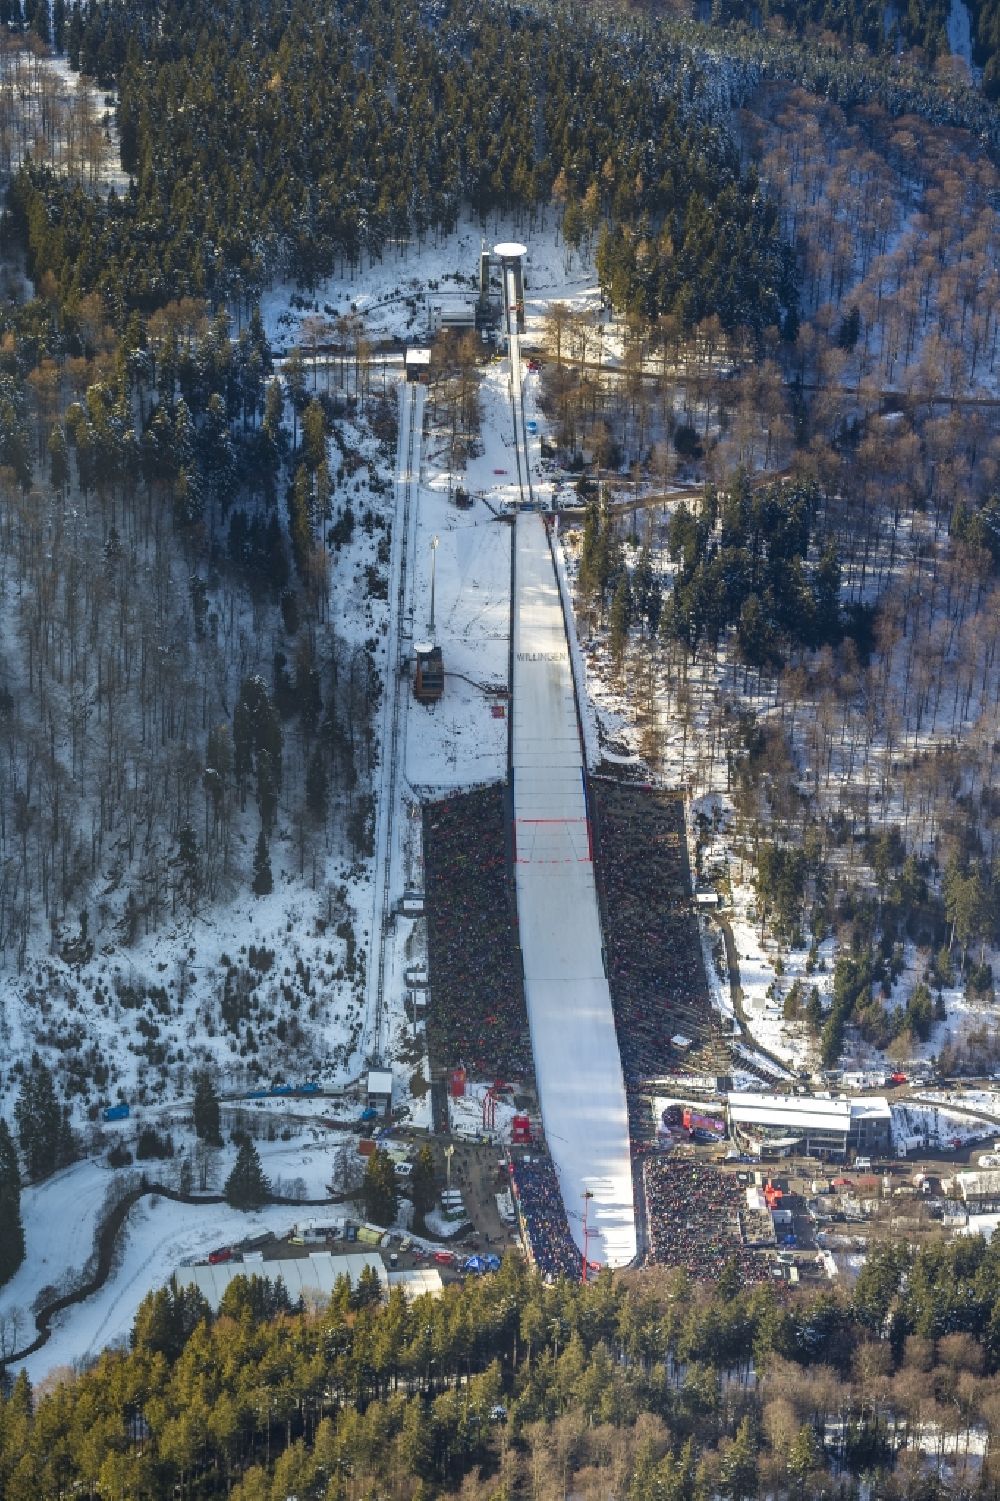 Willingen from above - Ski jumping at the World Ski Cup in Willingen 2014 in Willingen ( Upland ) in Hesse - Germany